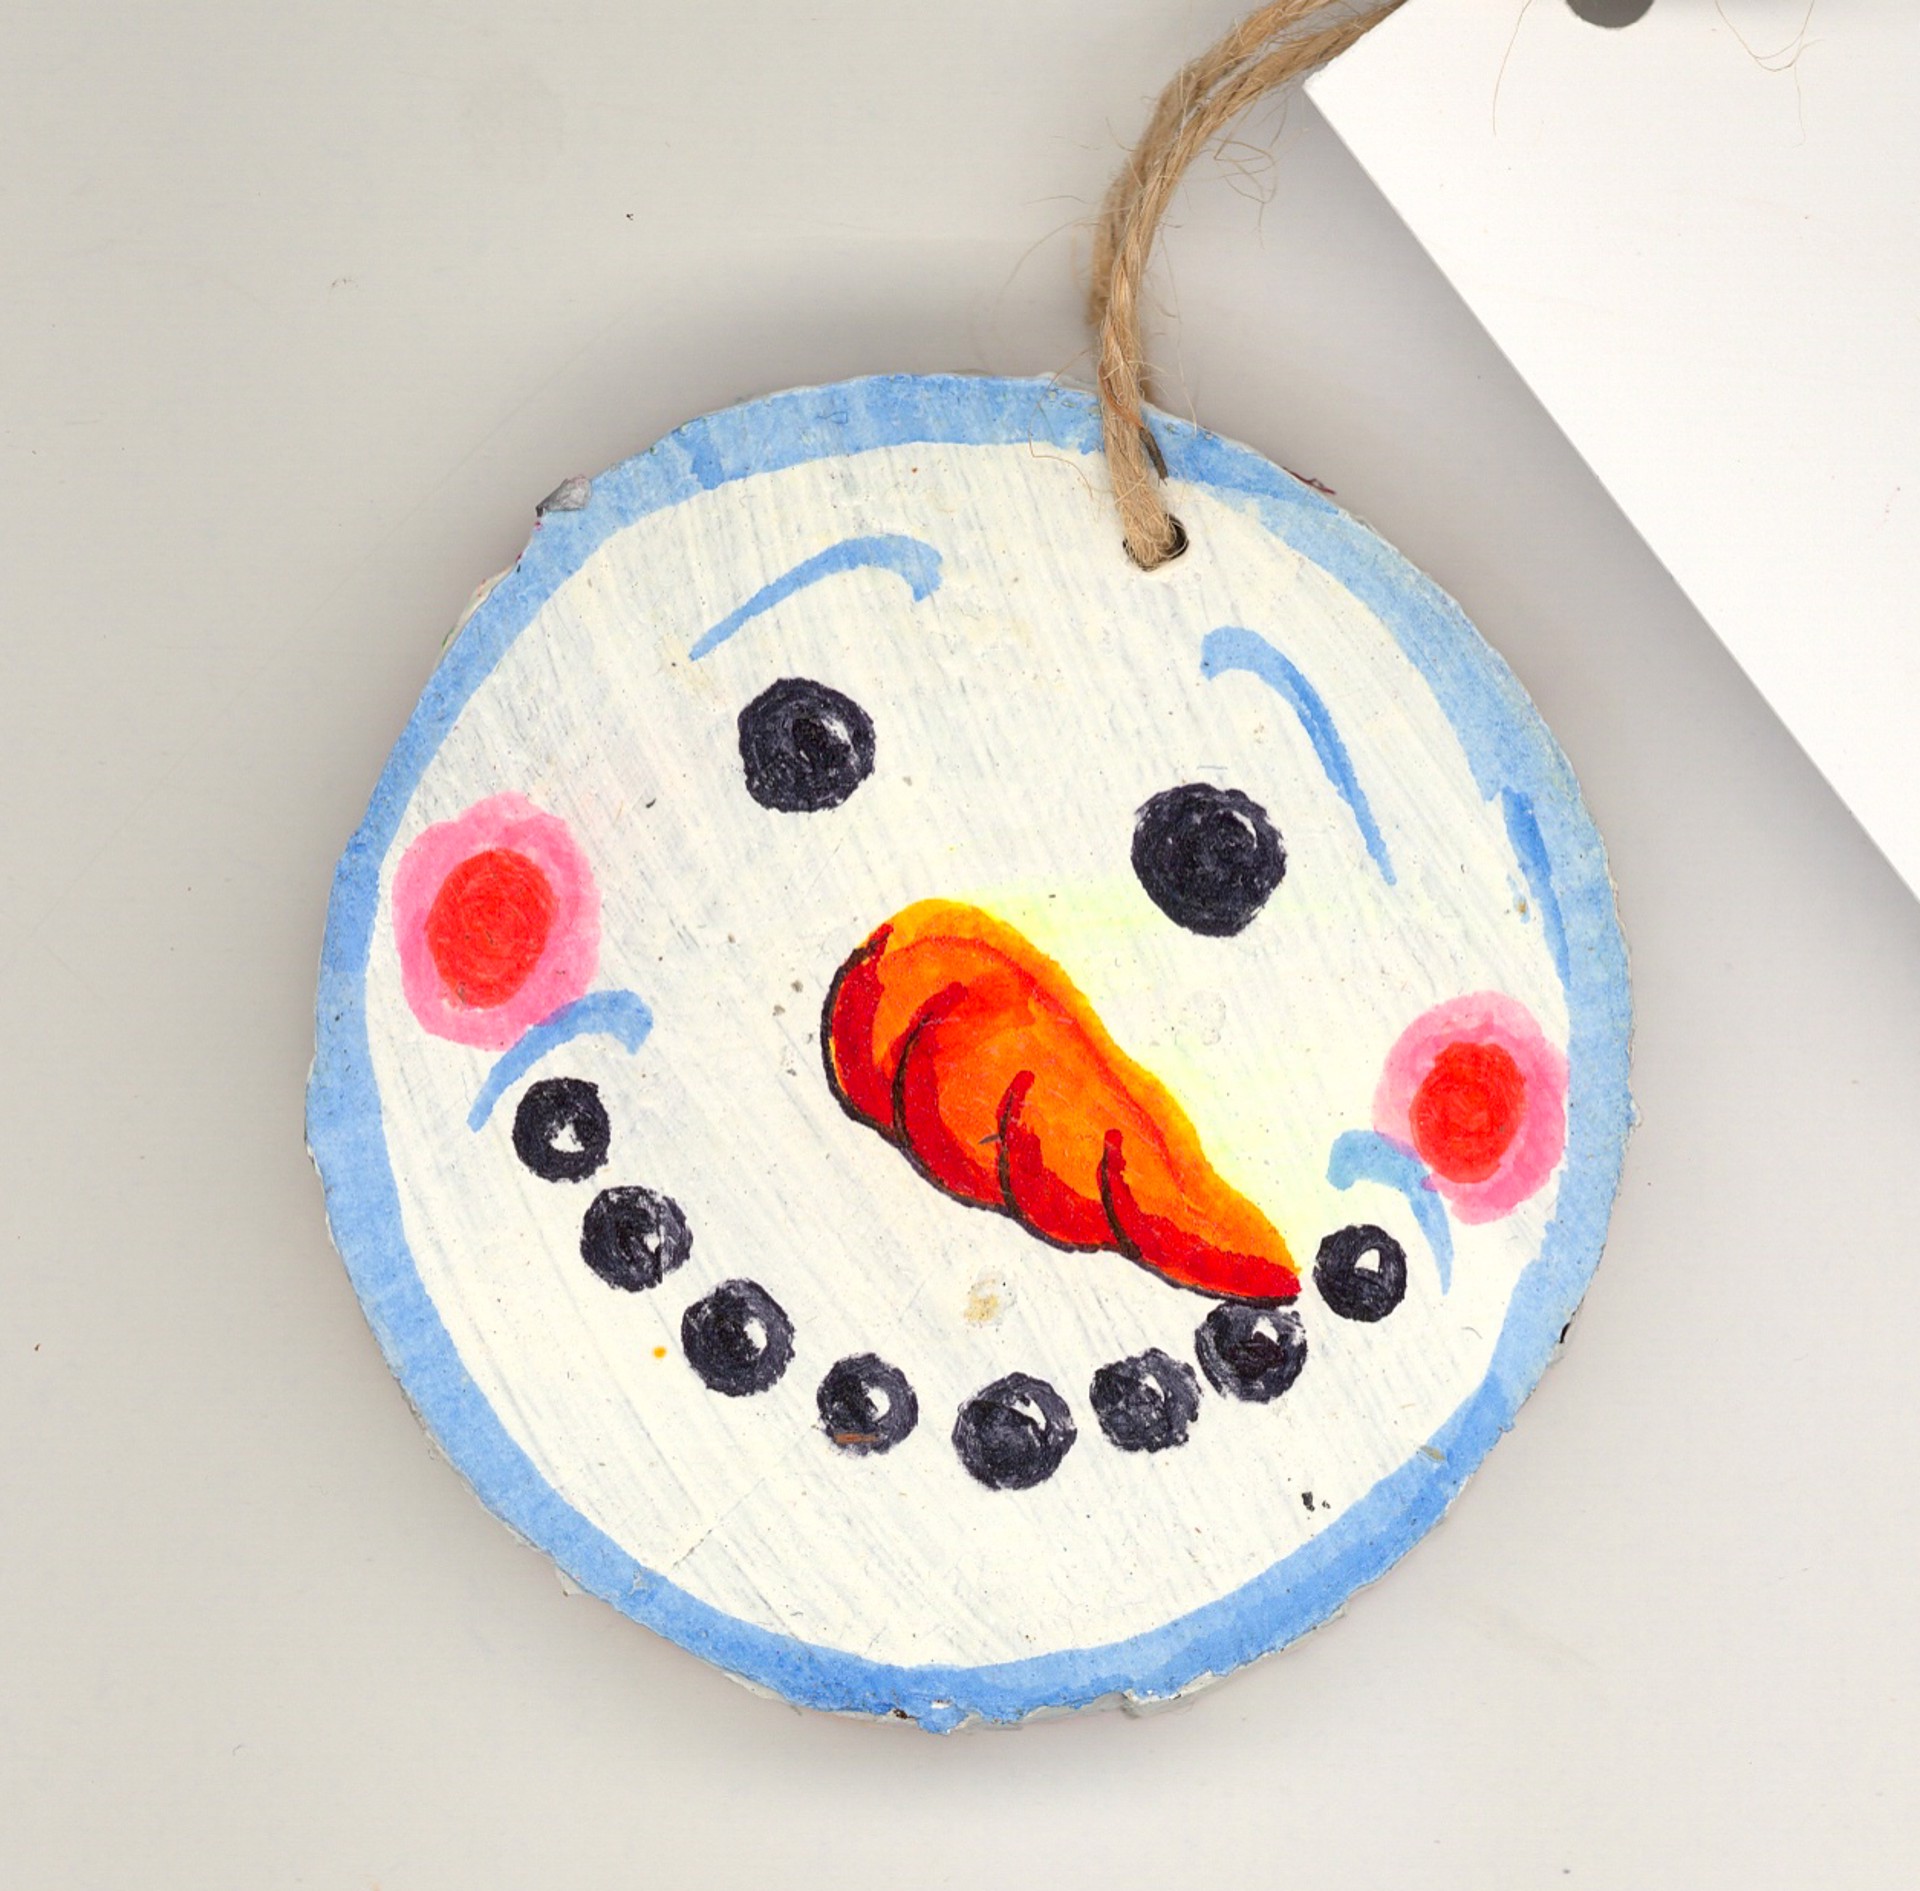 Snowman/Tree by the Fire (ornament) by CeeJ Maples